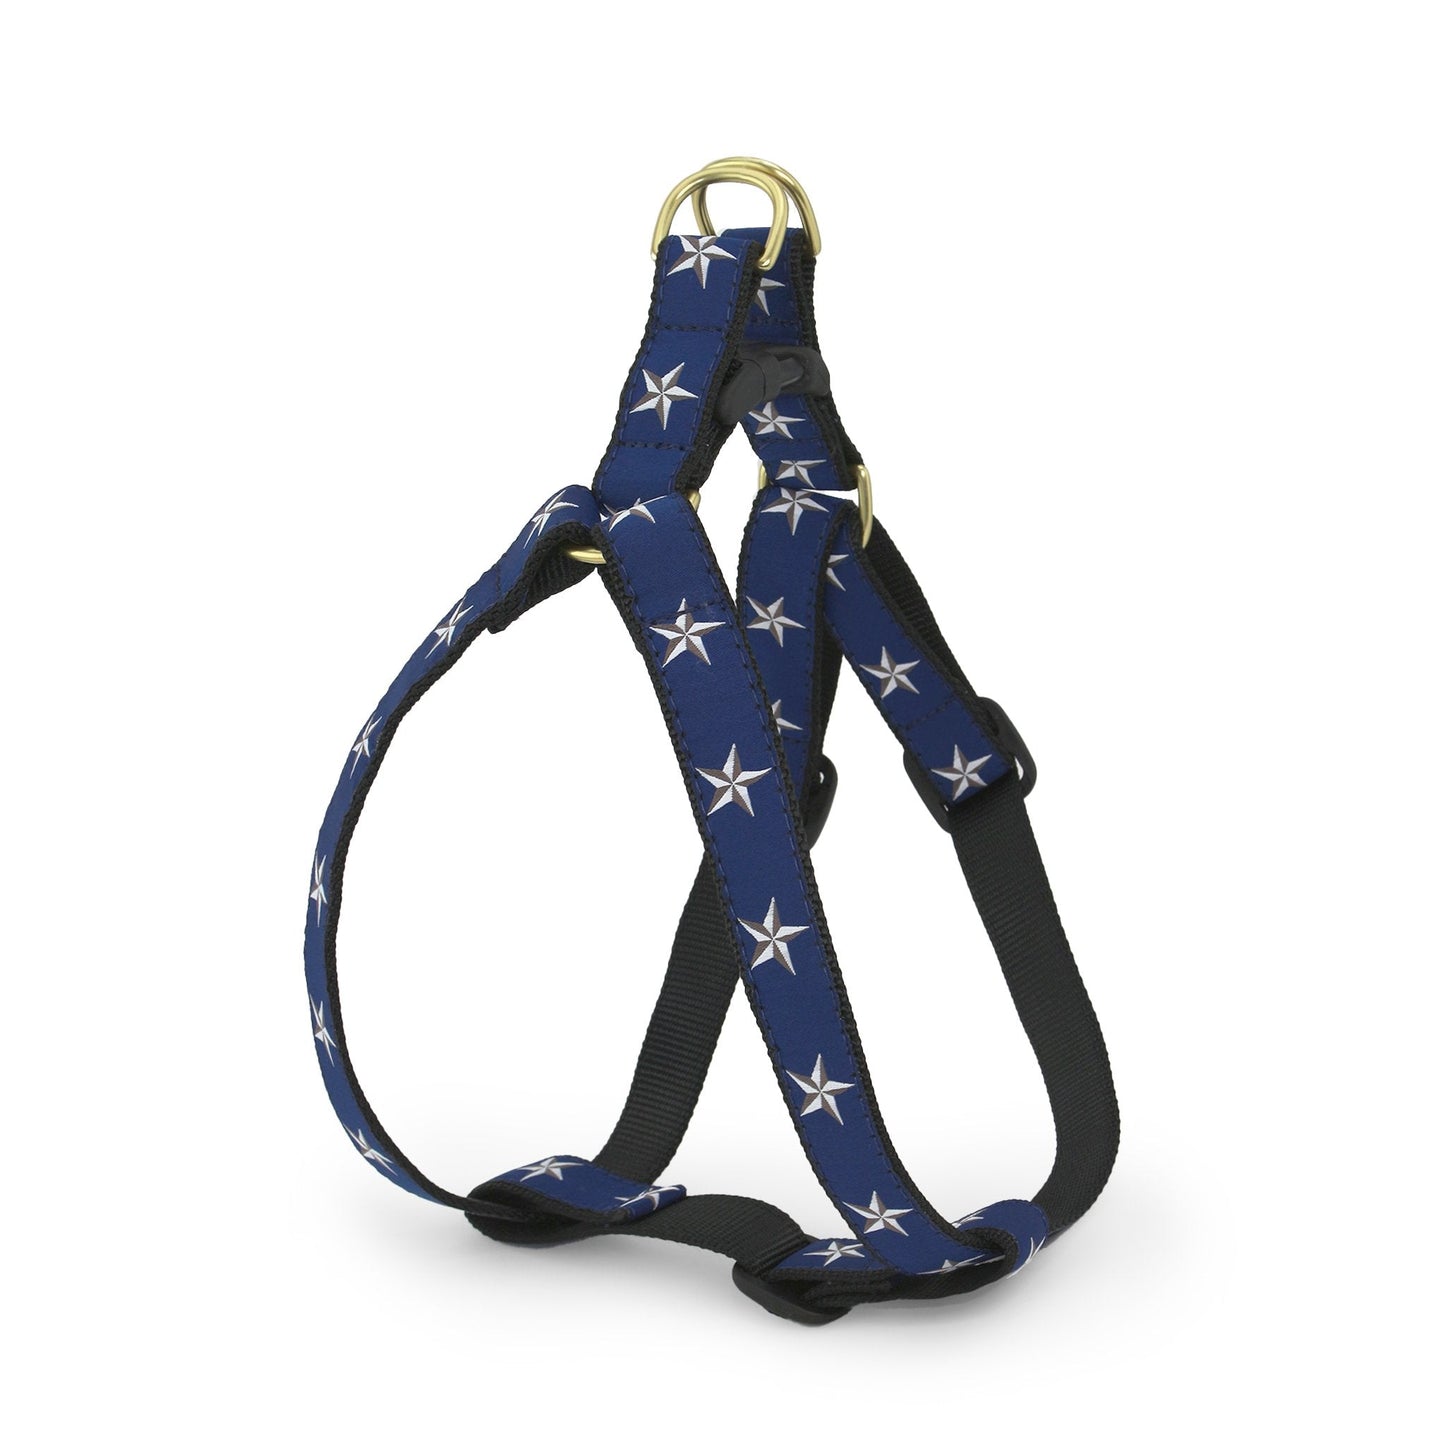 North Star Dog Harness by Up Country